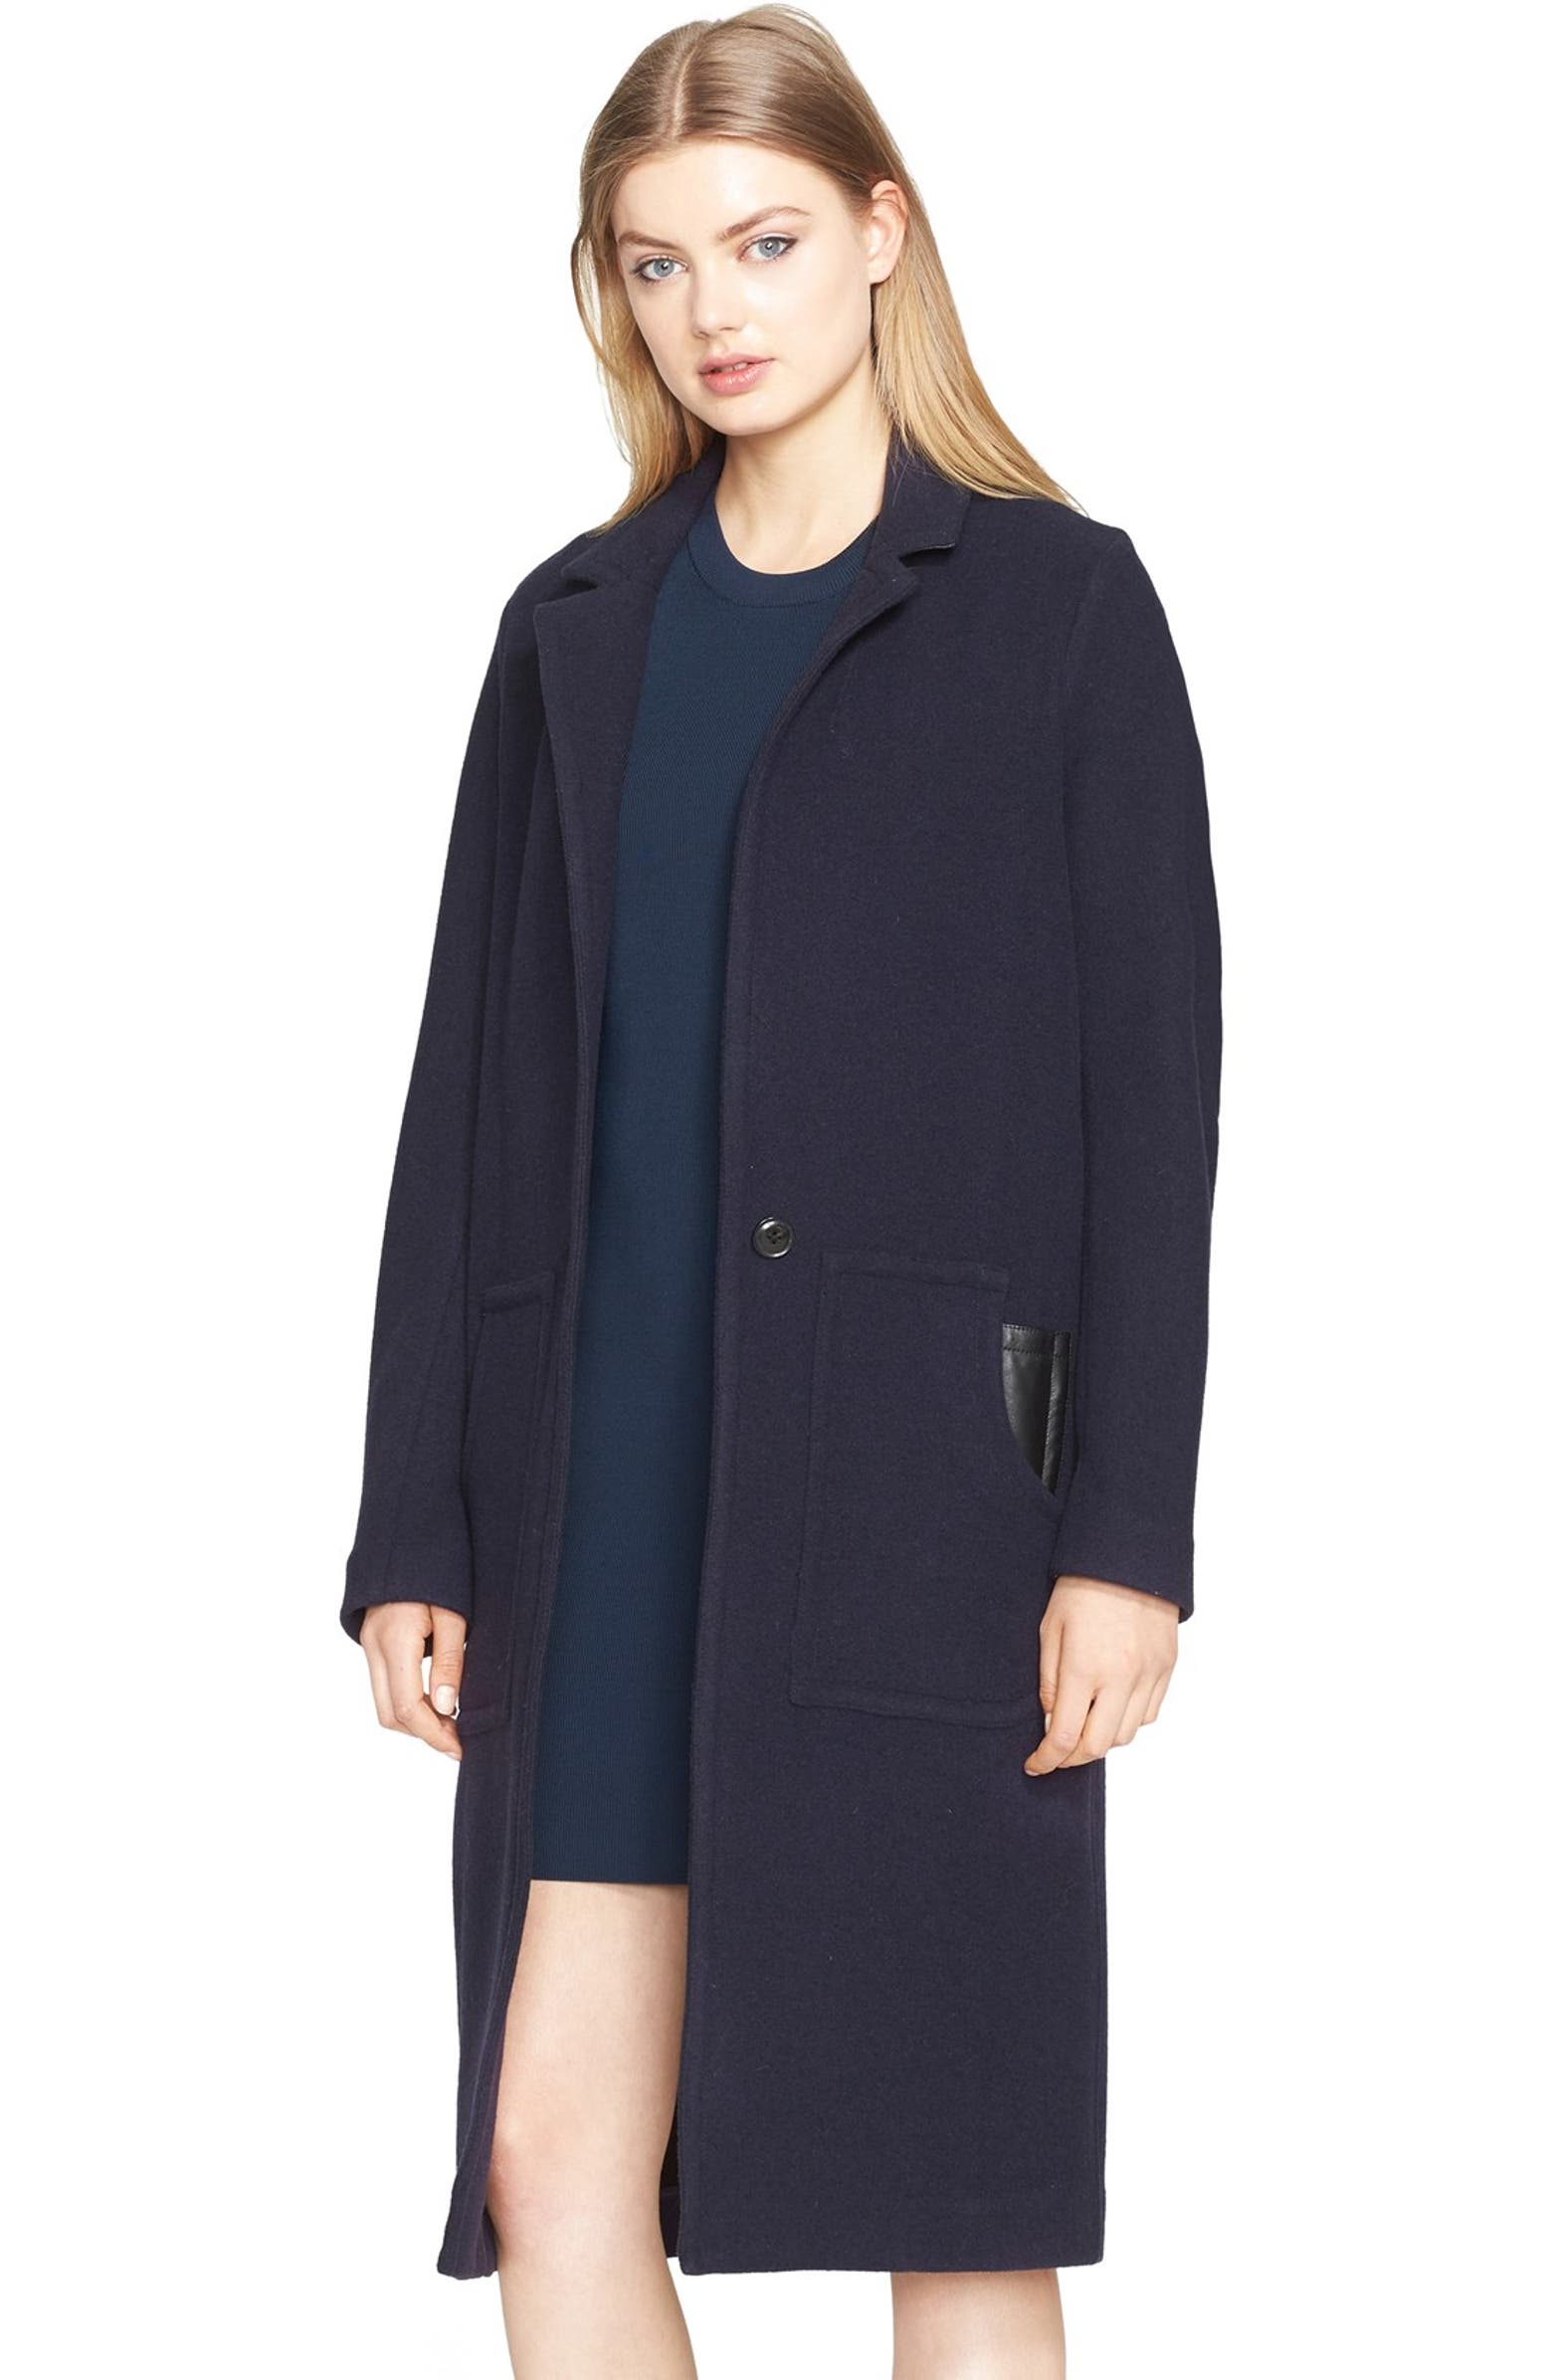 T by Alexander Wang Leather Trim Boiled Wool Blend Car Coat | Nordstrom